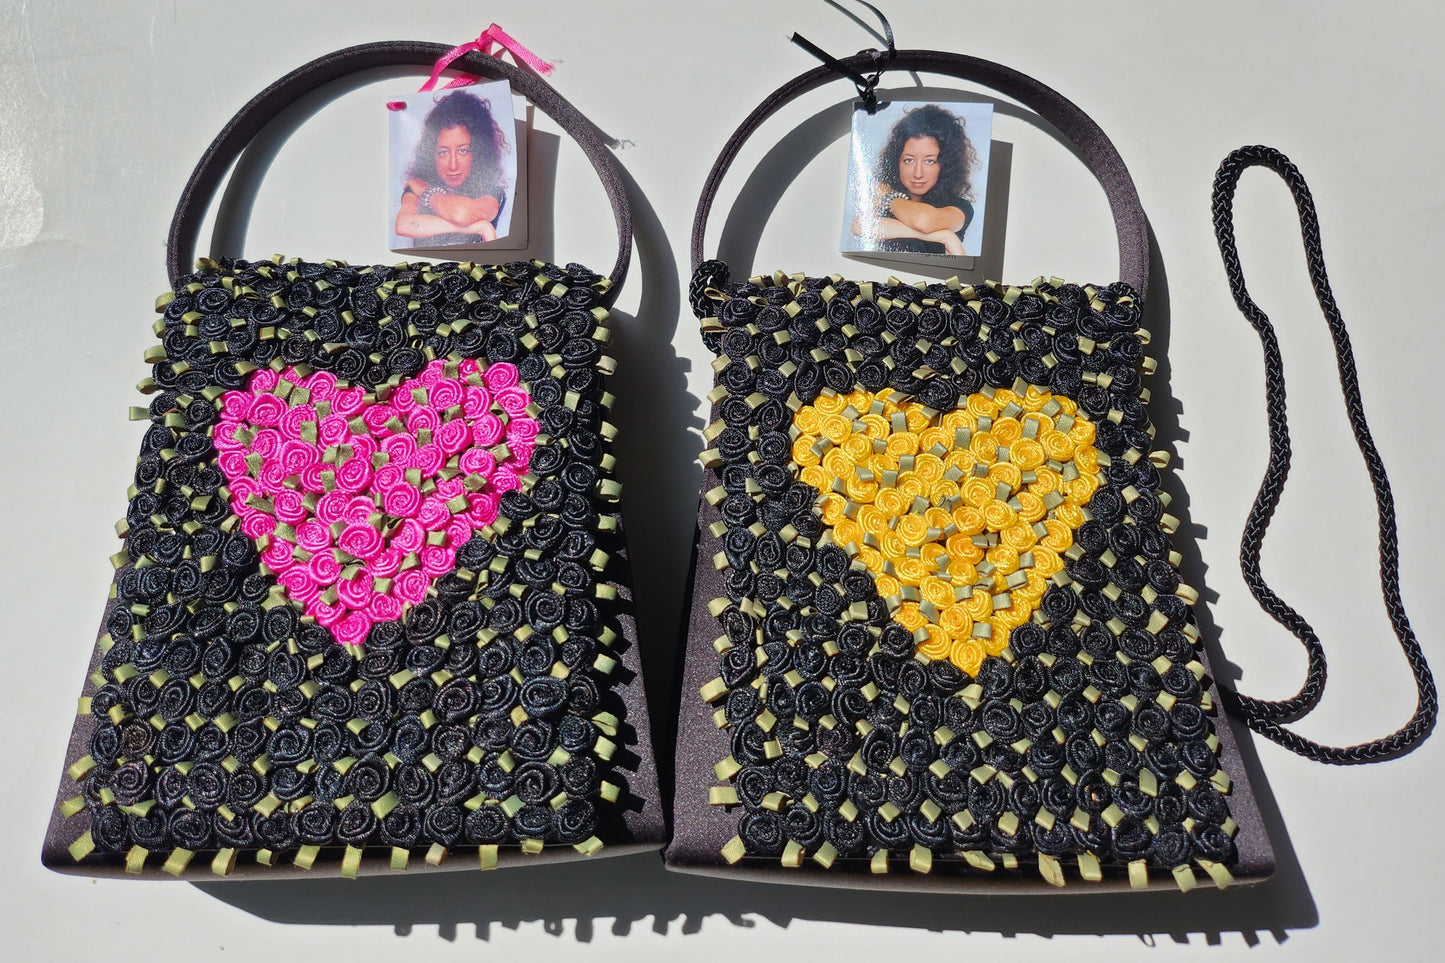 black satin evening purses covered in black silk ribbon roses with the choice of a fuscia heart design made of roses or a center heart design of yellow roses